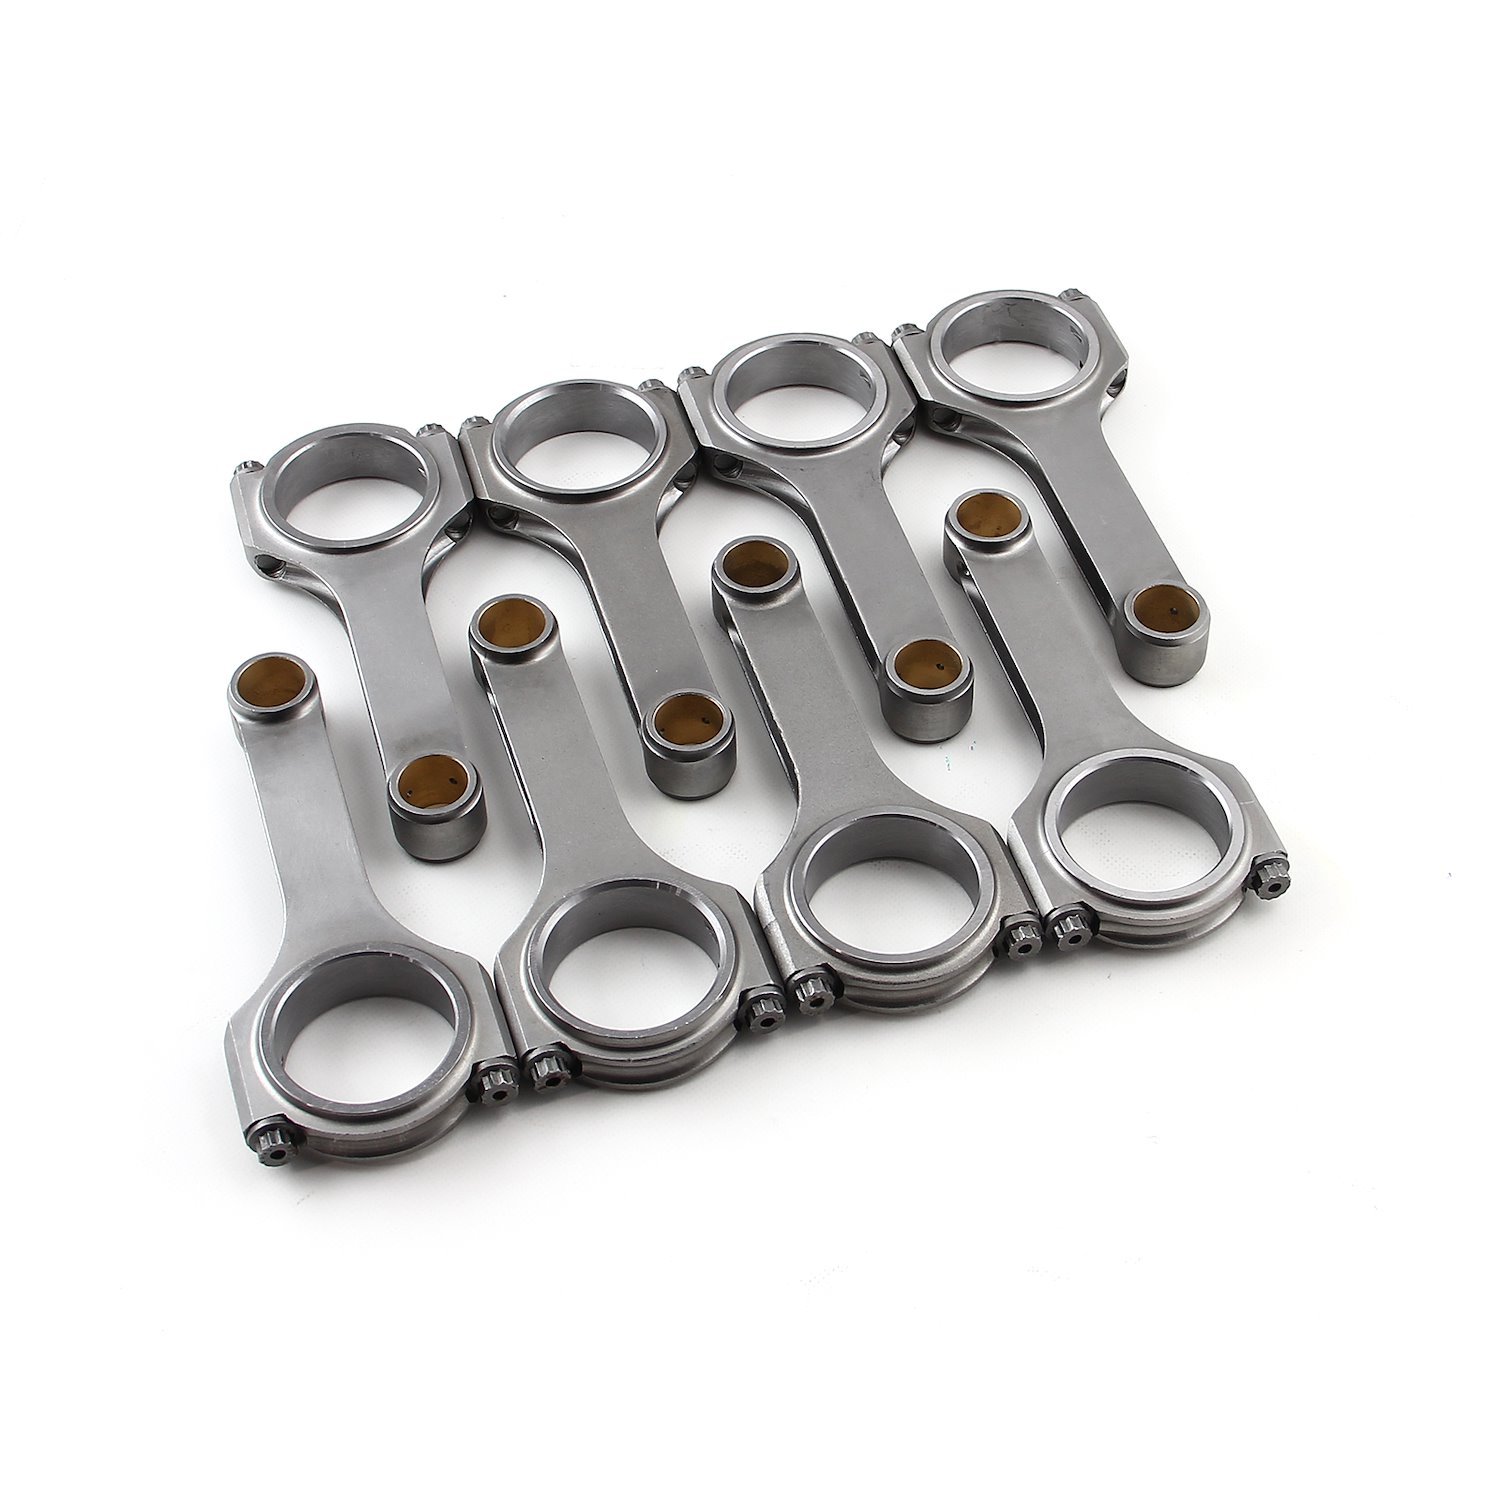 H-Beam Street/Strip Connecting Rods Small Block Ford 289/302 Windsor